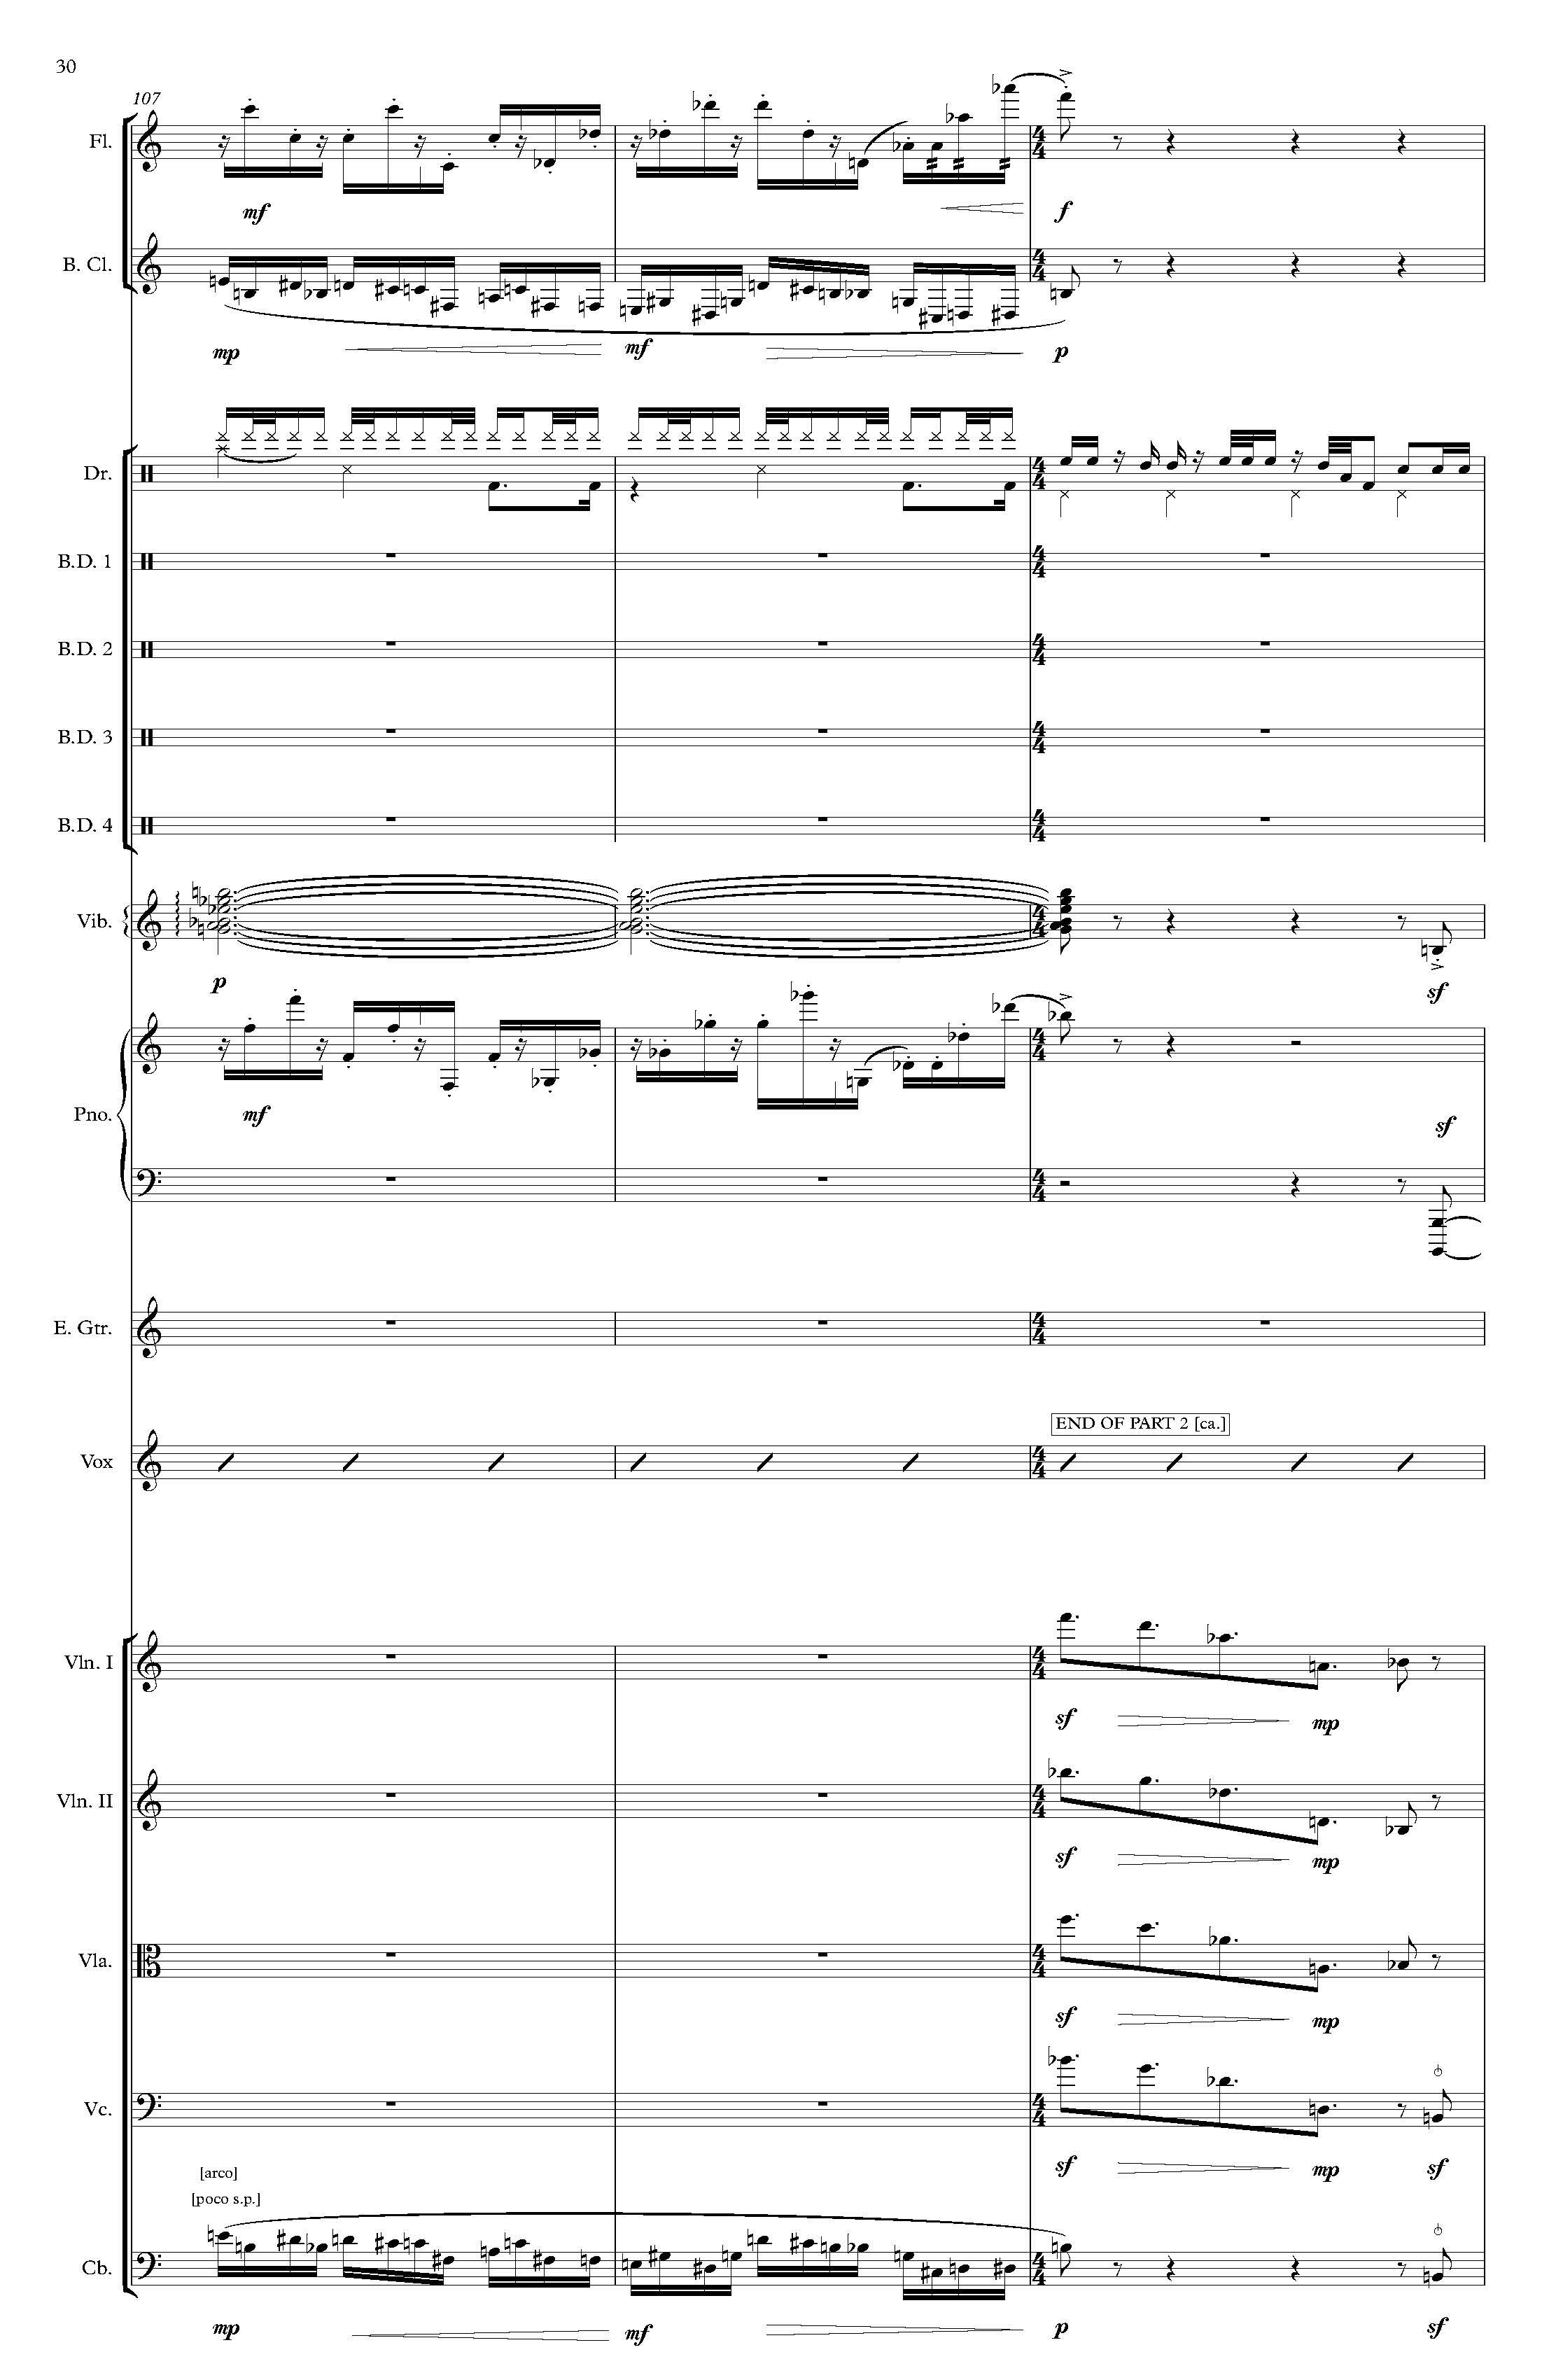 The Rembrandt of Avenue A - Complete Score_Page_36.jpg